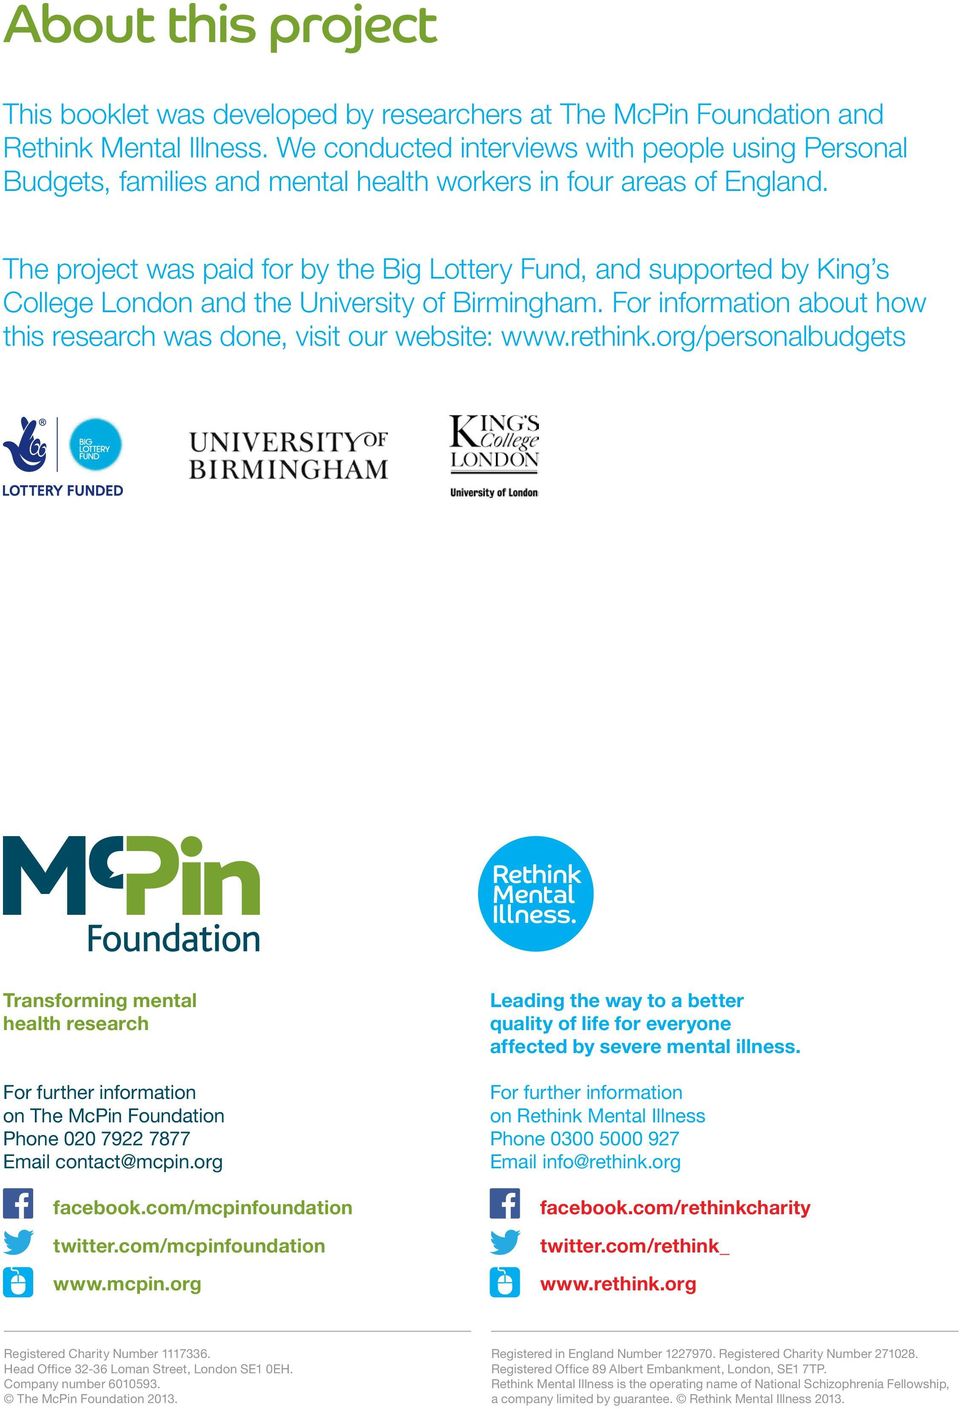 The project was paid for by the Big Lottery Fund, and supported by King s College London and the University of Birmingham. For information about how this research was done, visit our website: www.